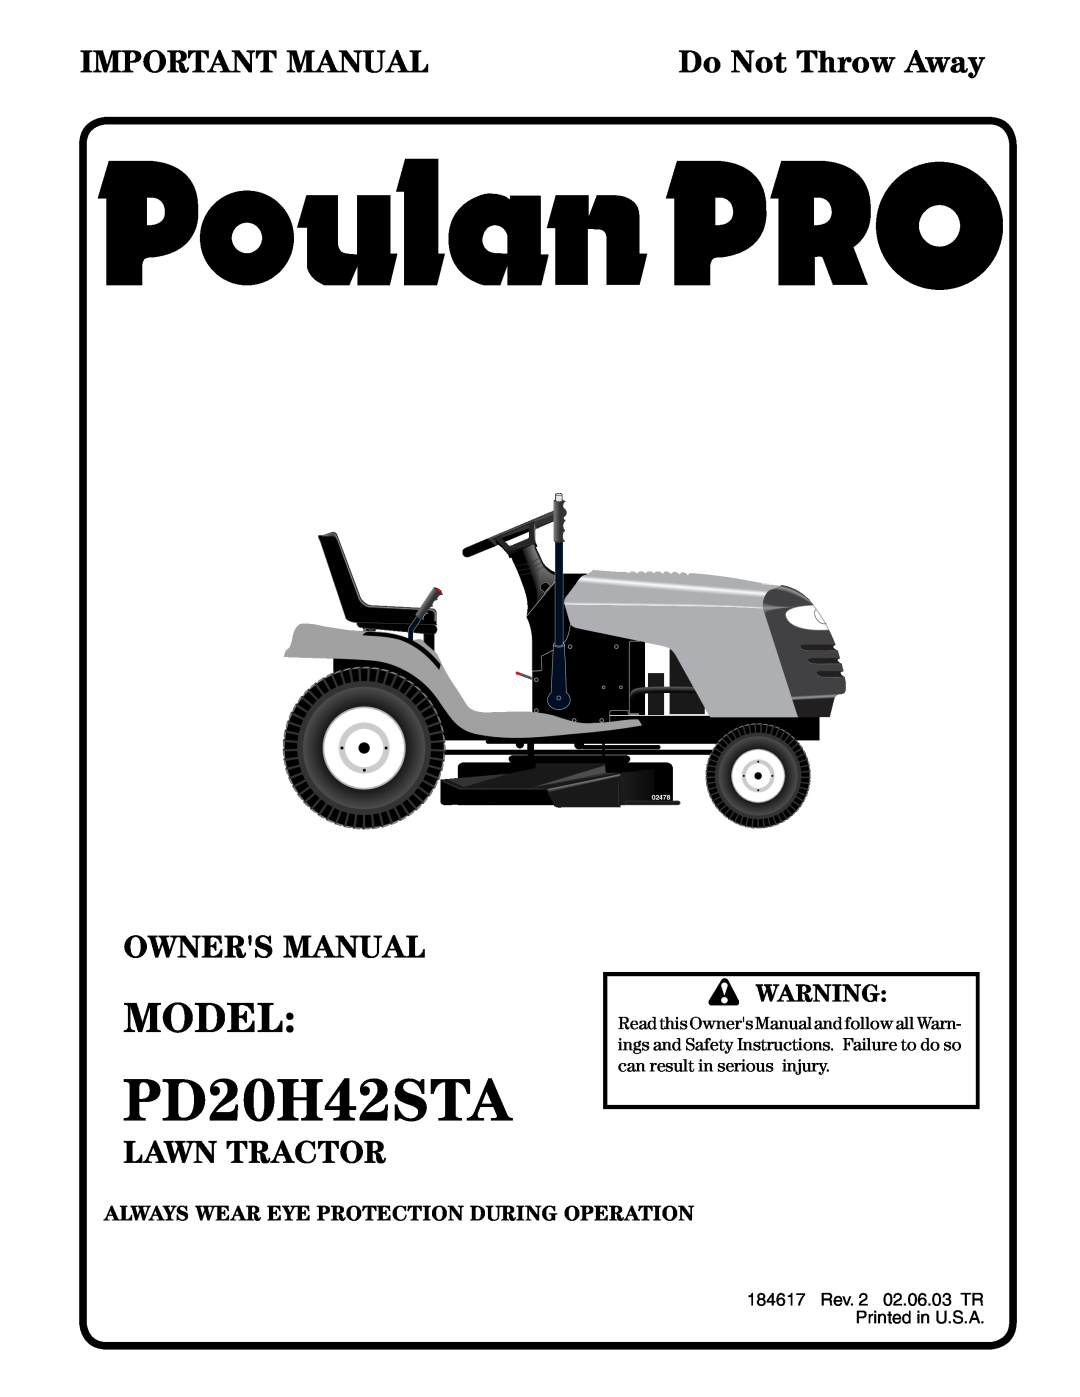 Poulan PD20H42STA owner manual Model, Important Manual, Lawn Tractor, Do Not Throw Away, 02478 